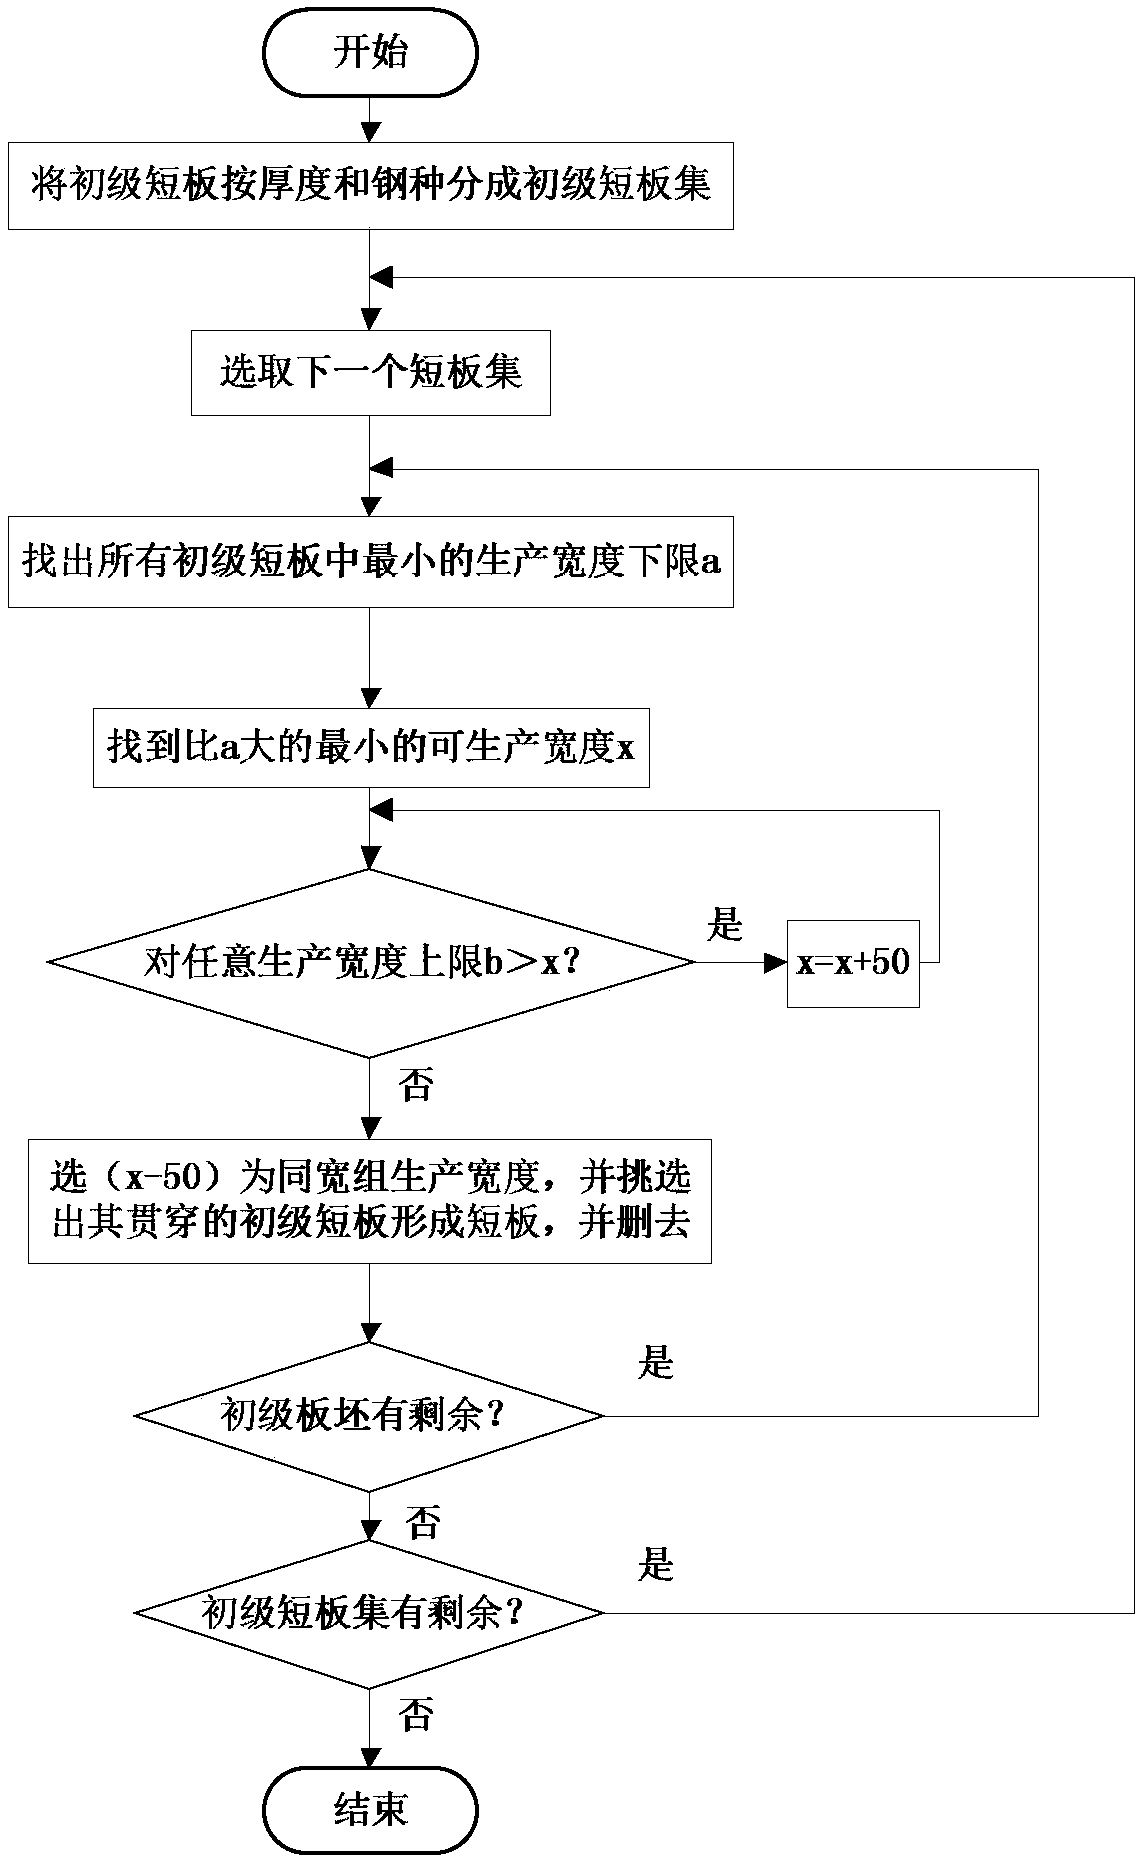 Steel-making and continuous casting industrial process optimization control method